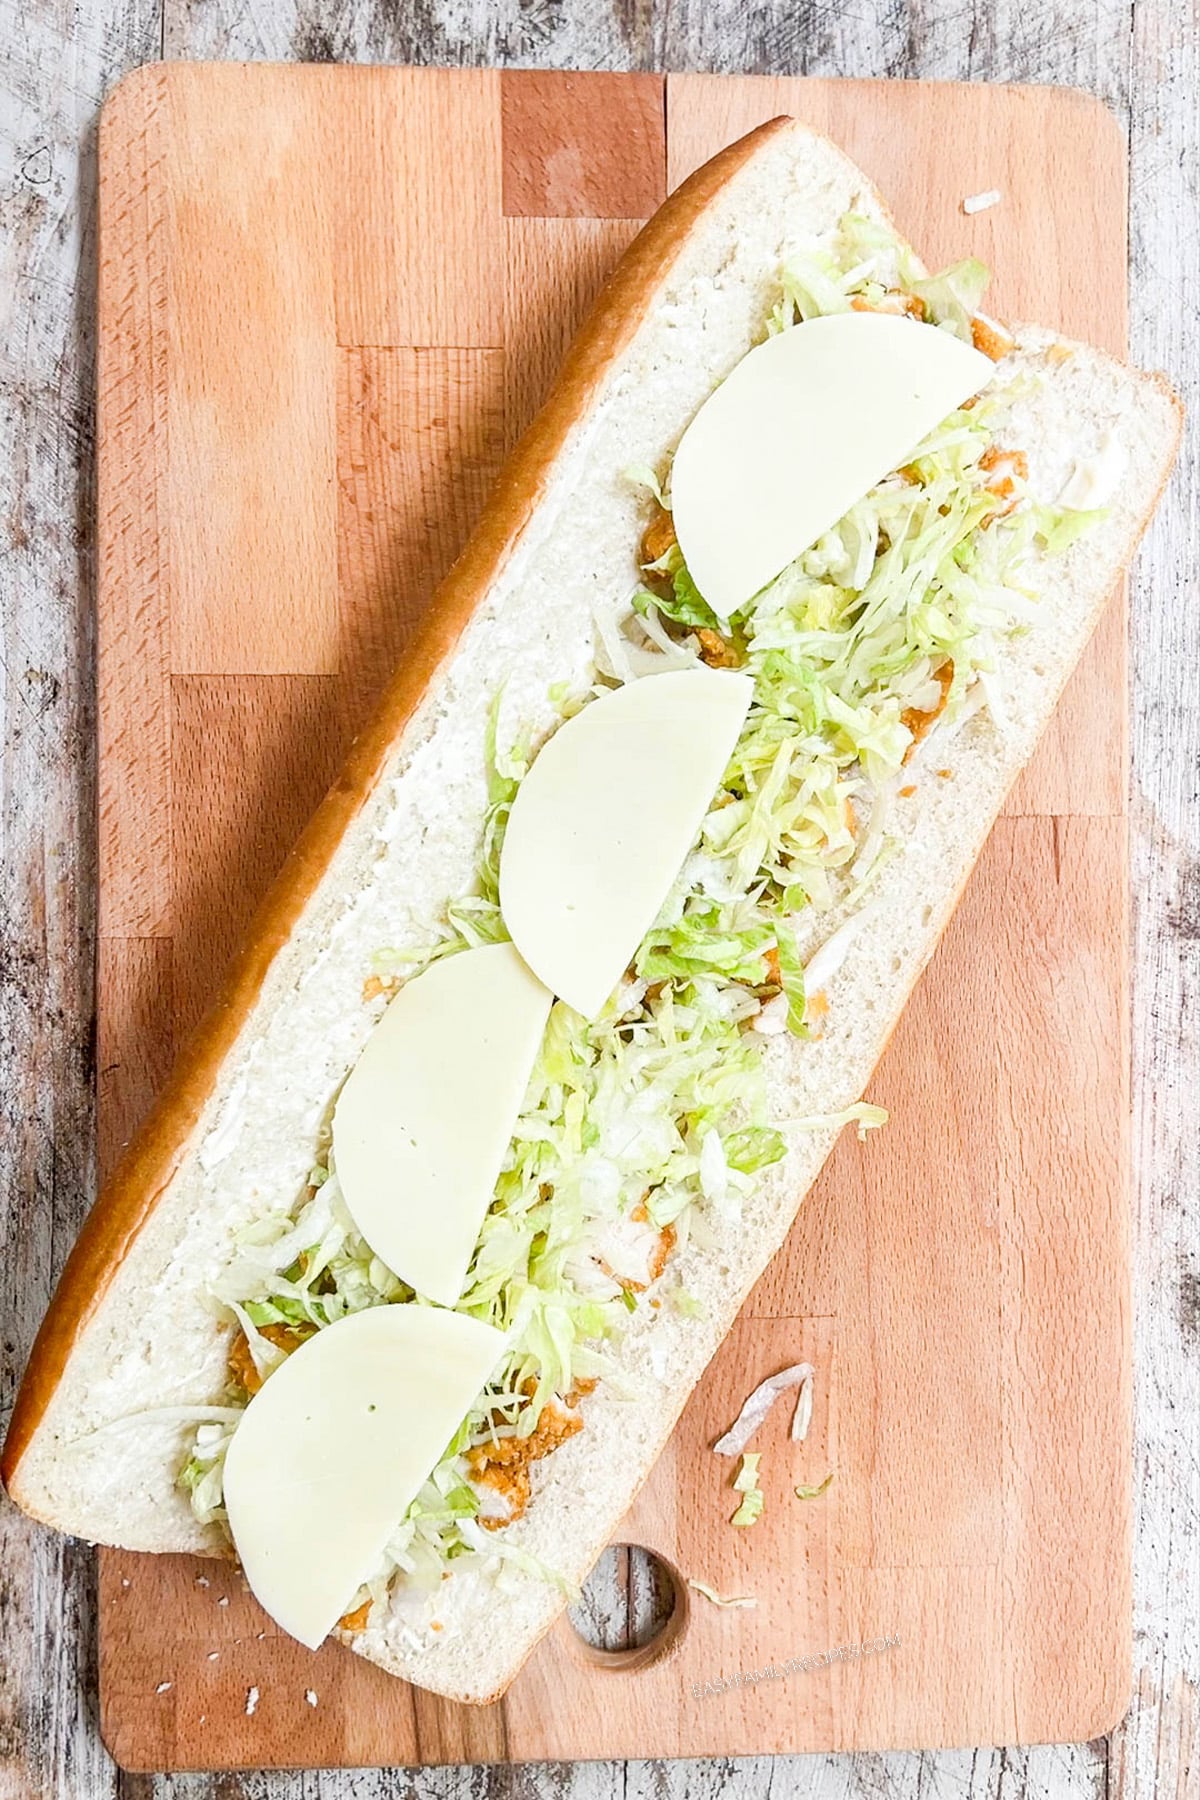 Assembling a chicken tender sub on a wooden cutting board: Adding the lettuce and cheese.